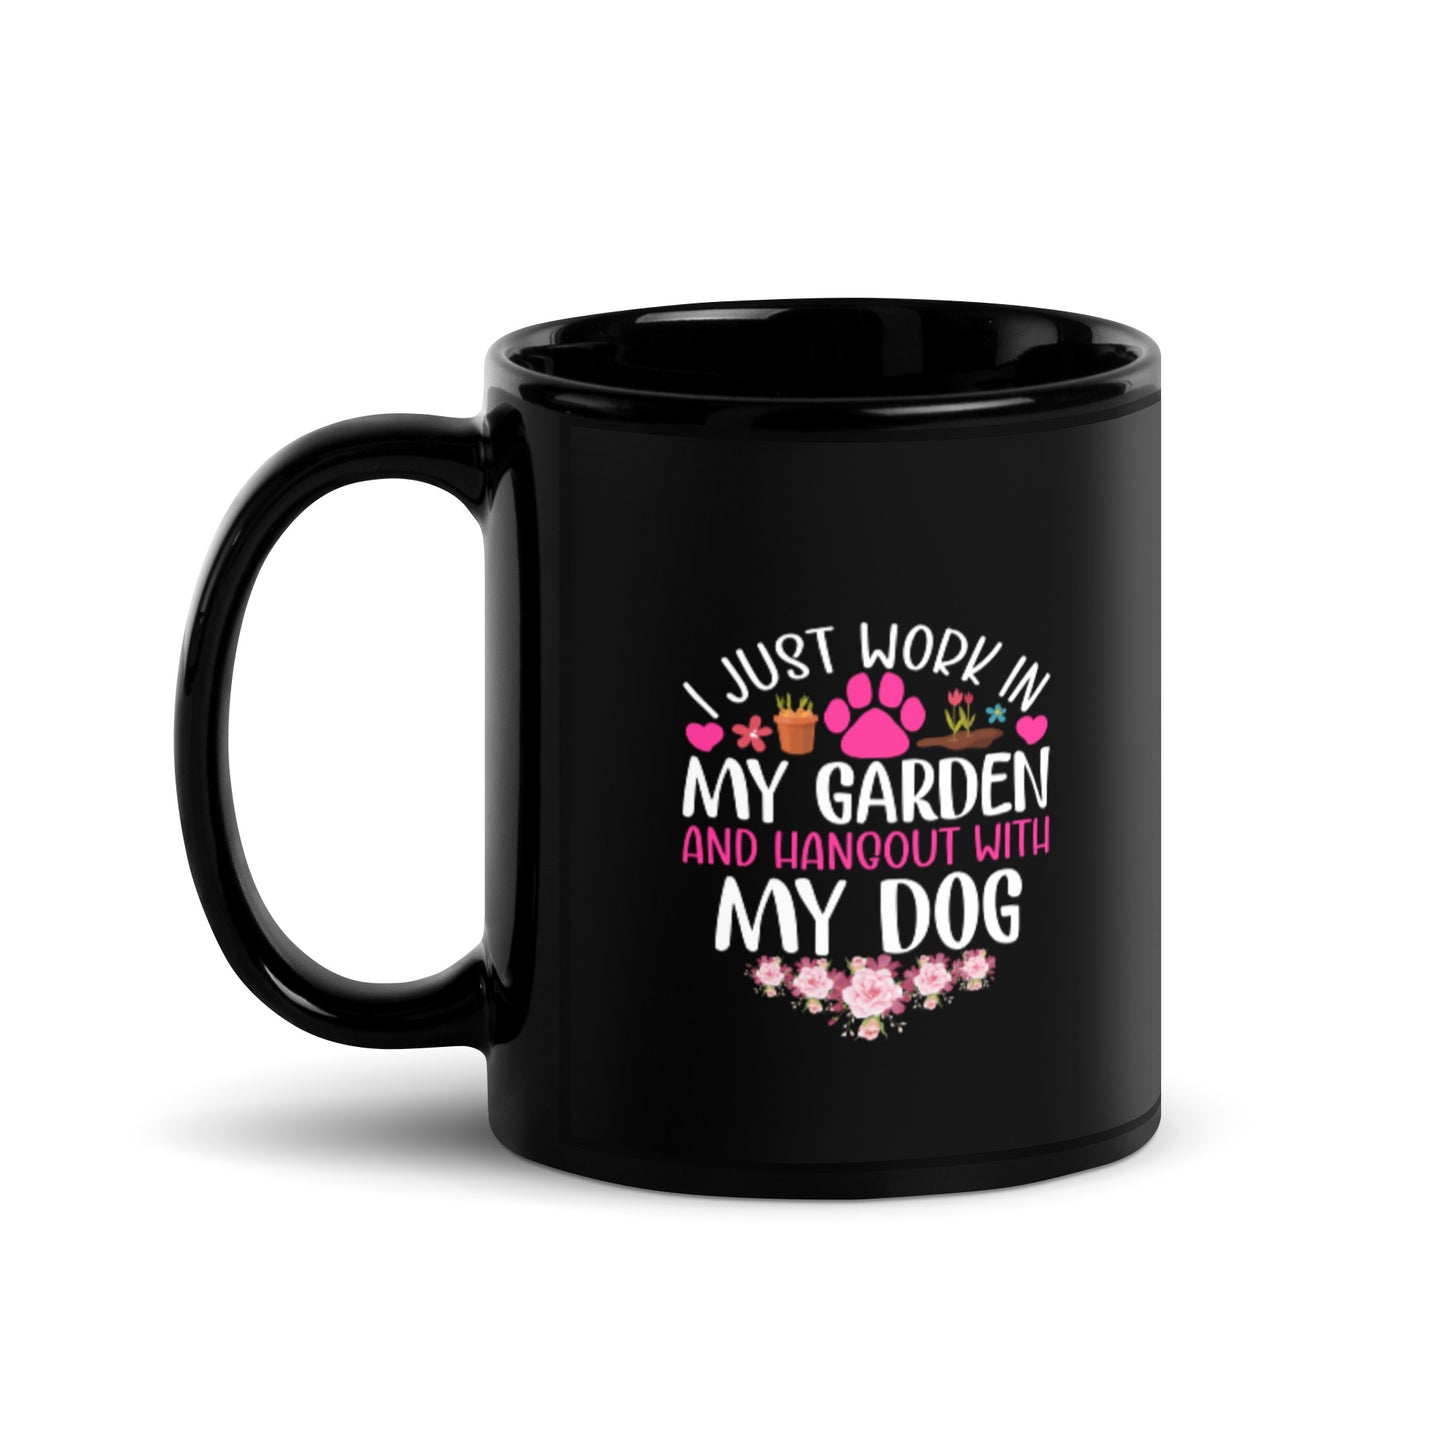 I Just Work in my Garden and Hang Out with my Dog Black Glossy Mug